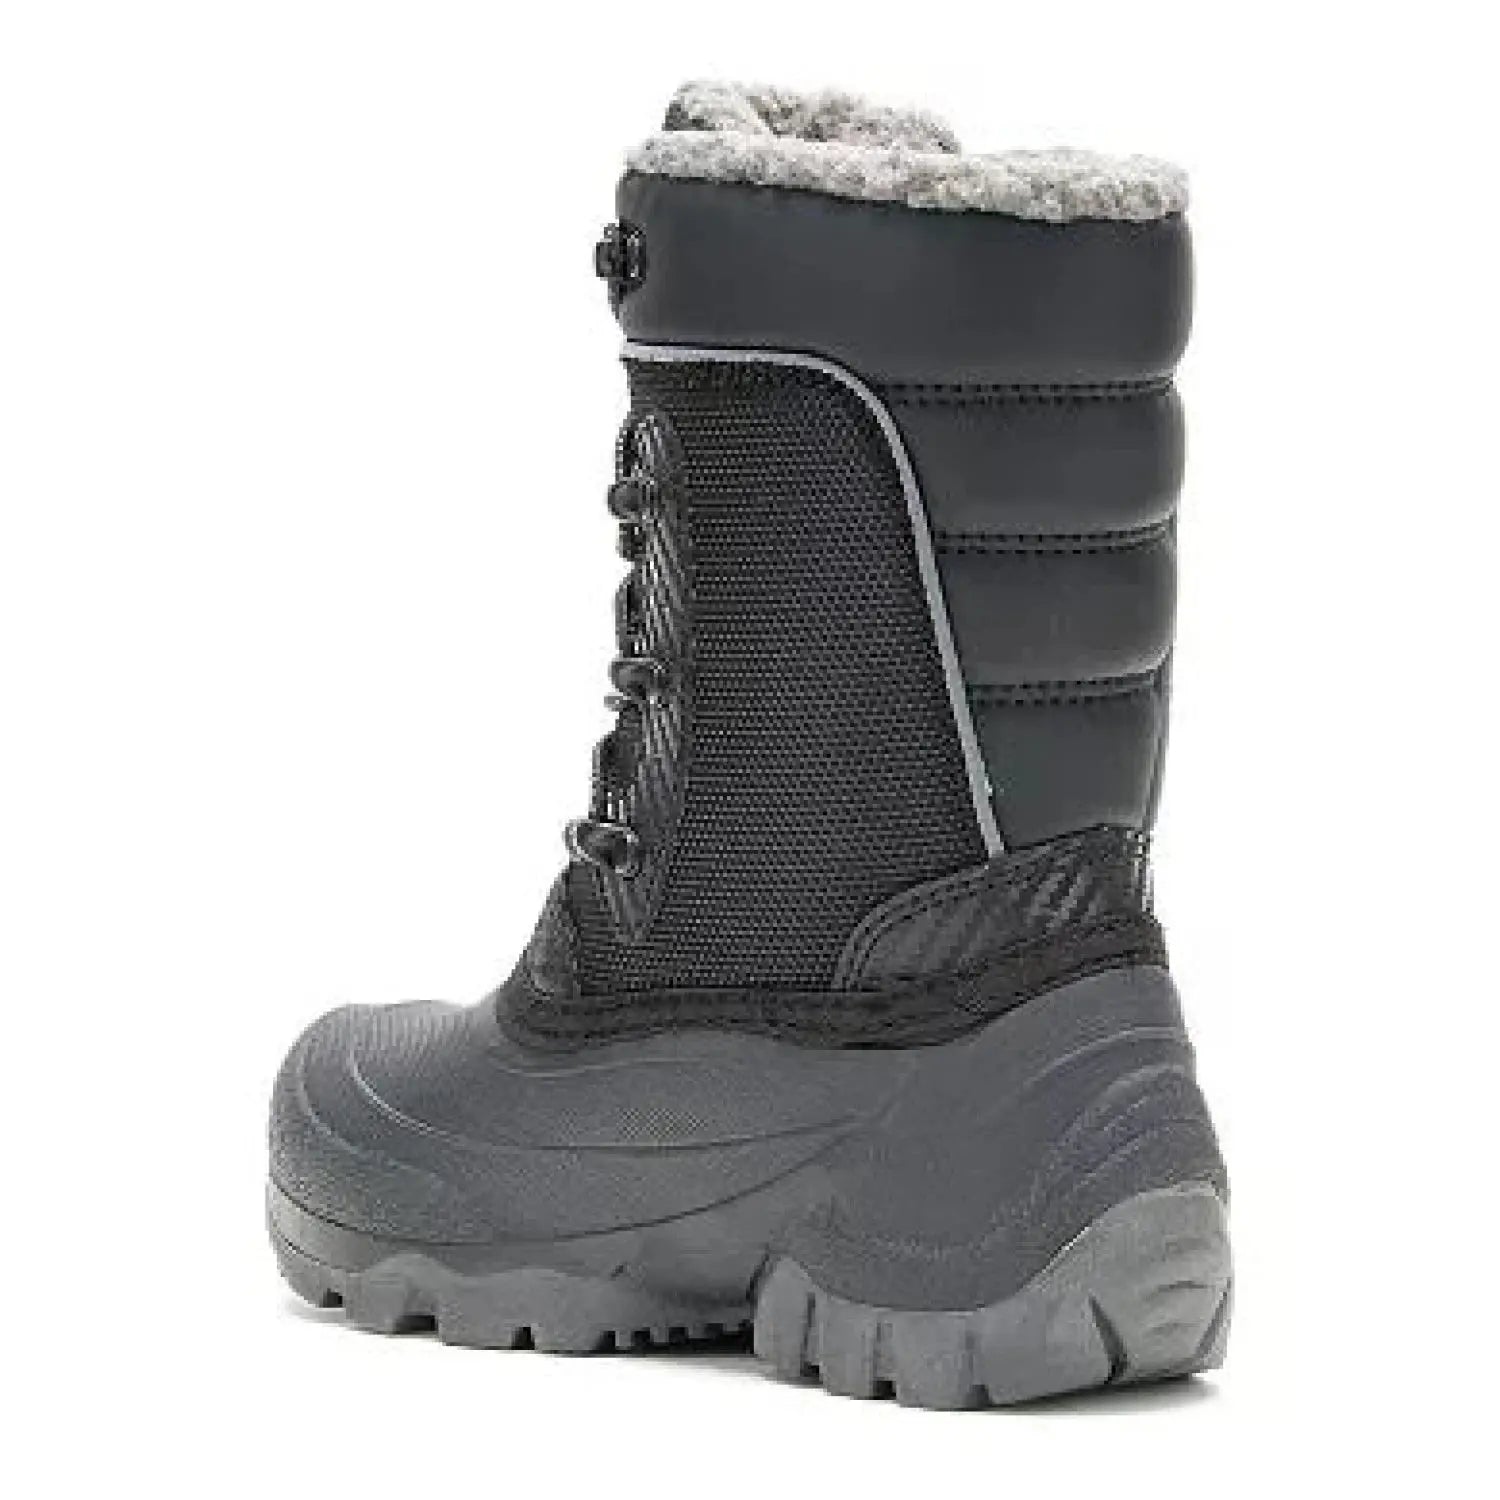 Kamik Luke 3 snow boot with bungee laces. Shown in Black, back view.